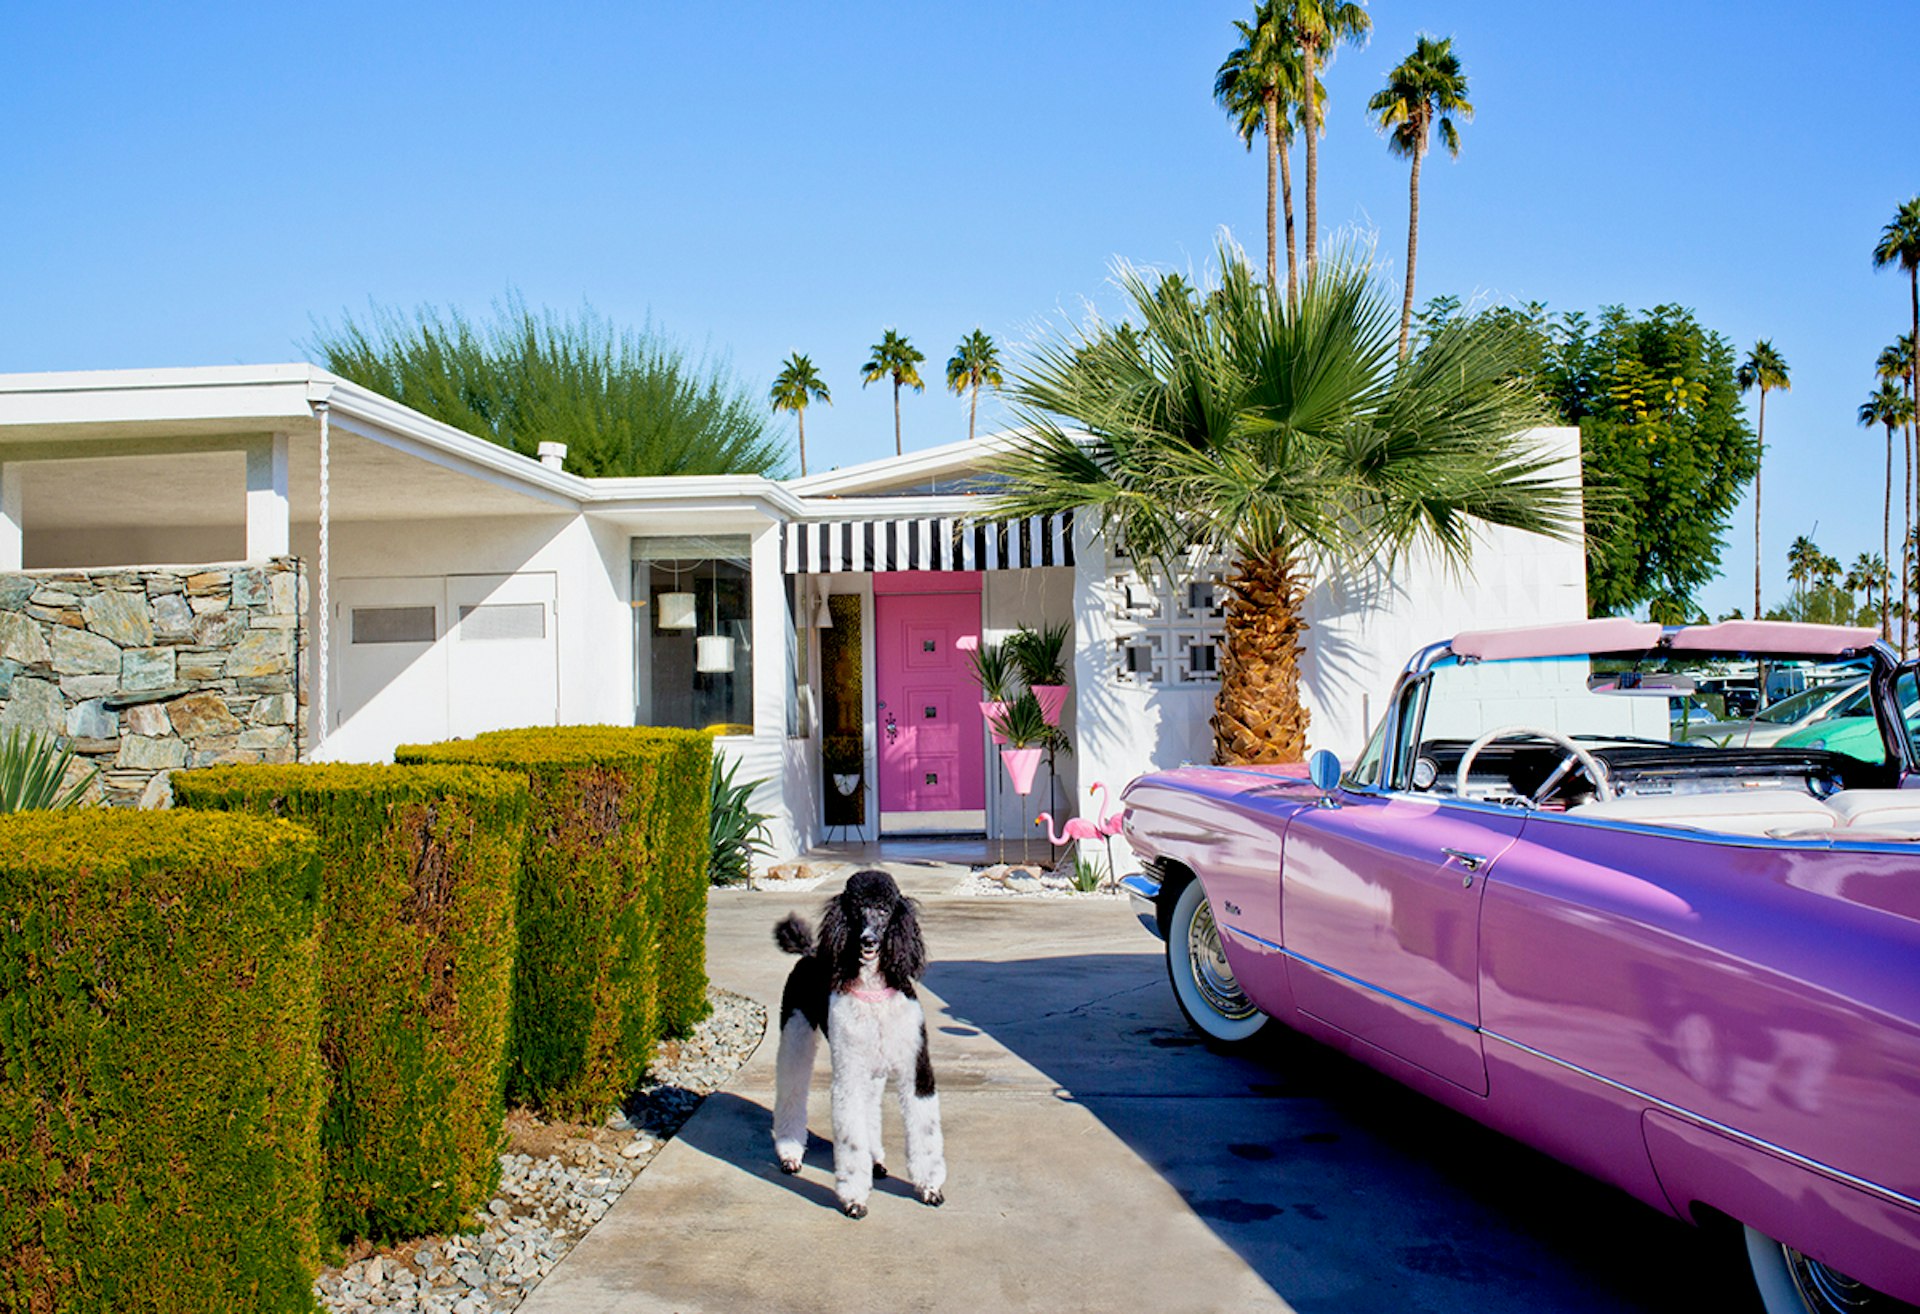 Flamboyant portraits of Palm Springs and its residents